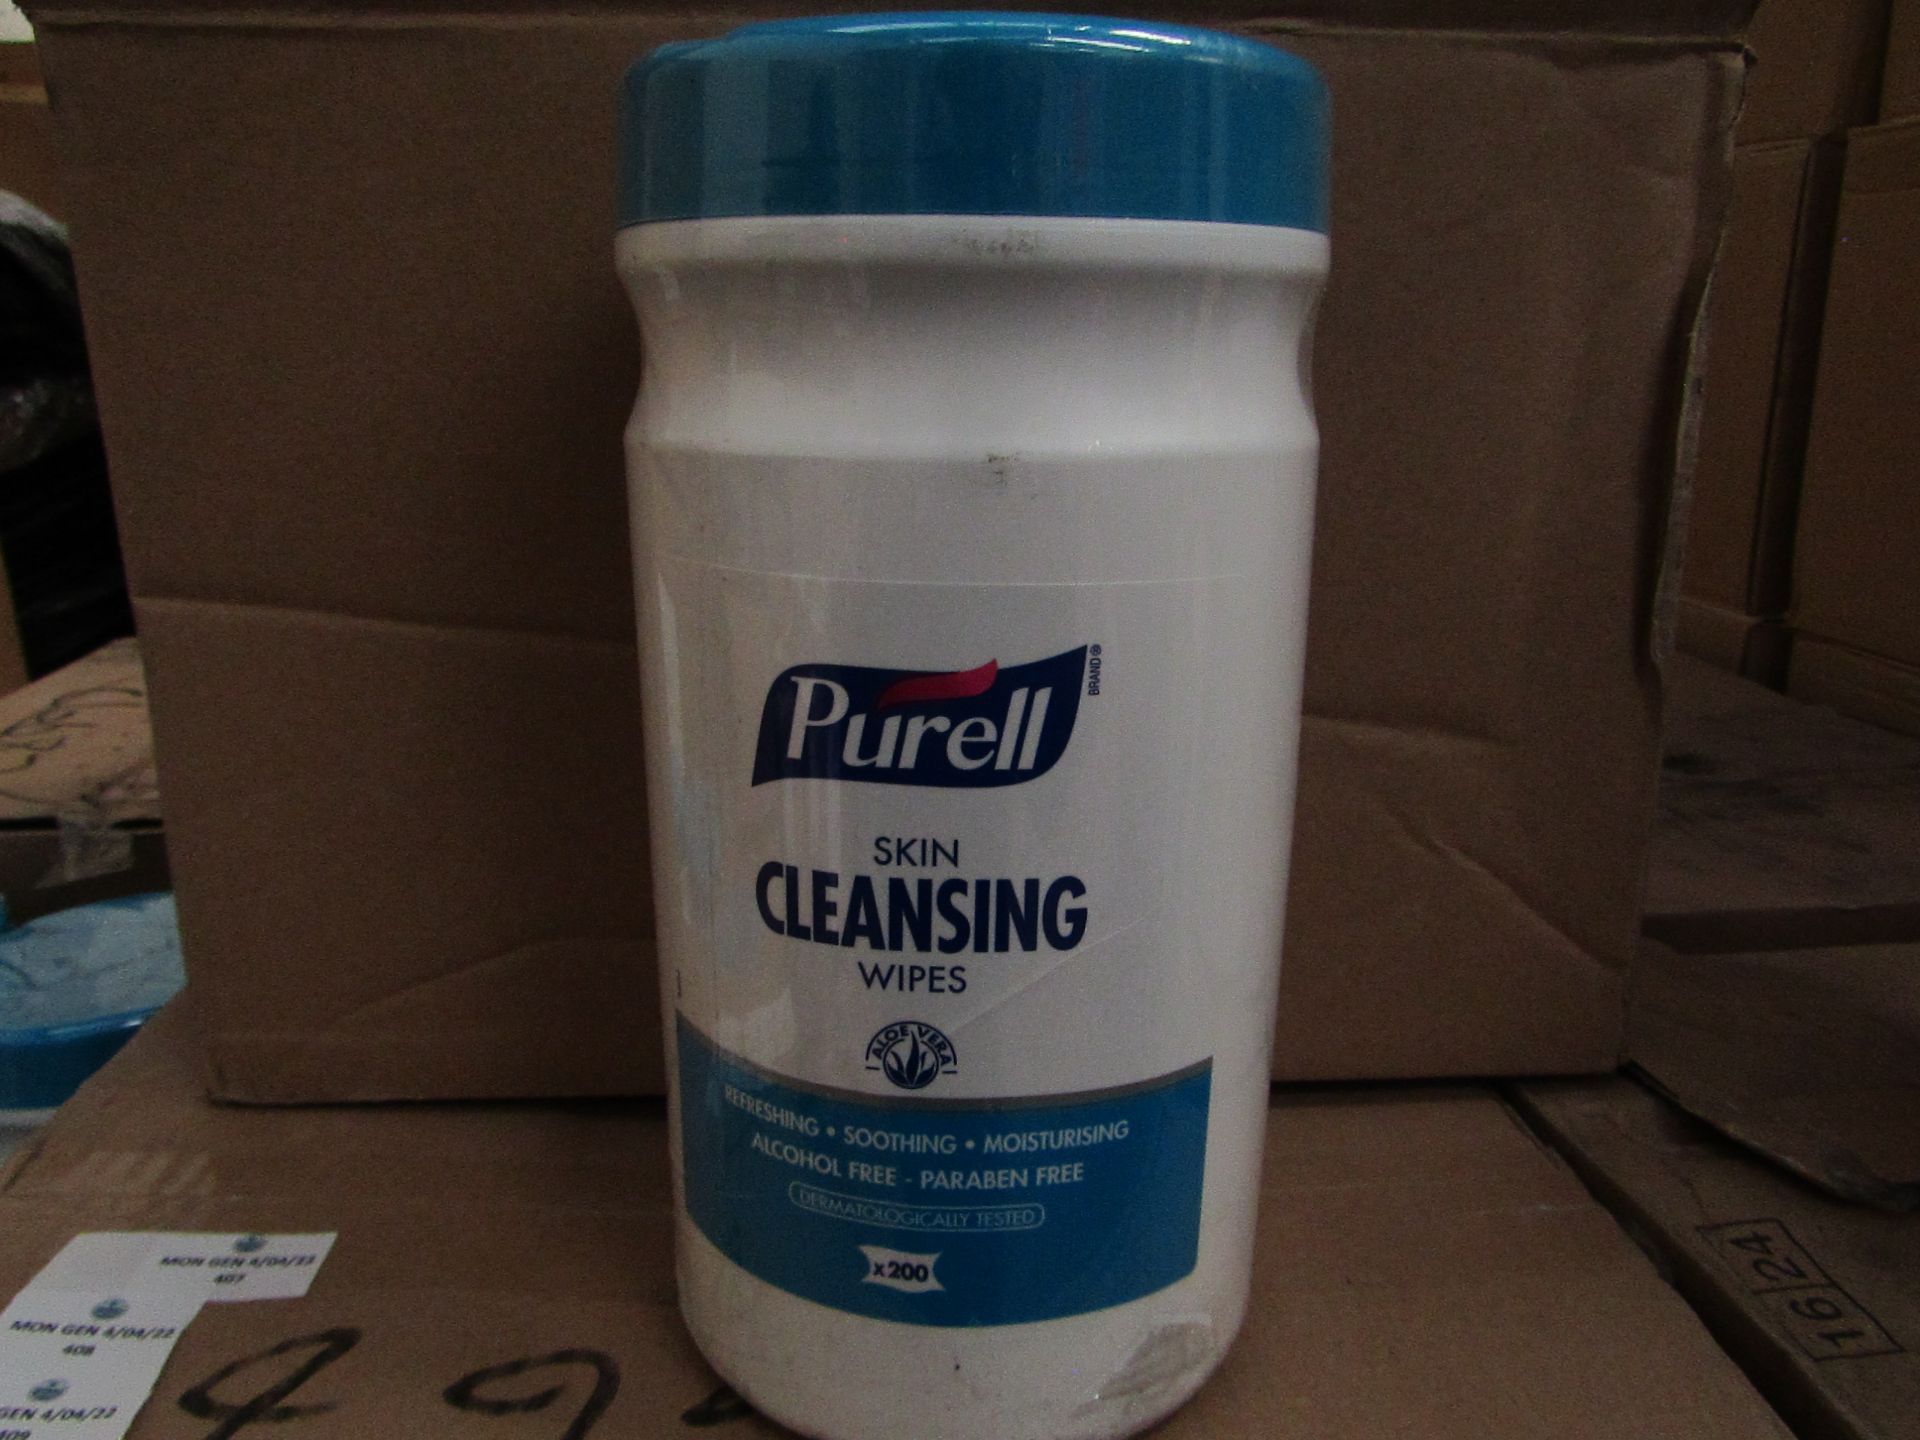 3x Purell - Sking Cleansing Wipes ( 200 Wipes ) - New & Packaged.